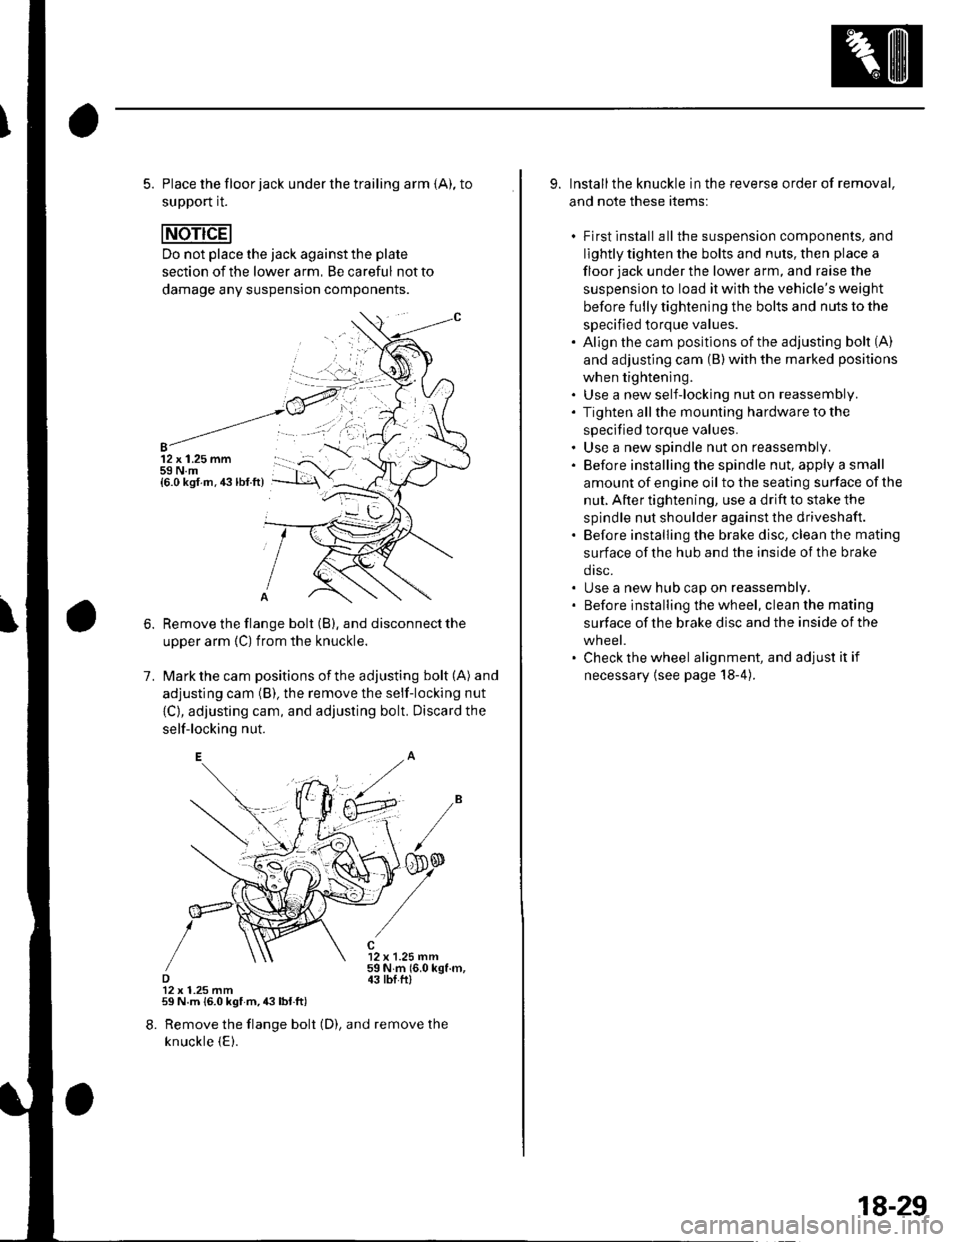 HONDA CIVIC 2002 7.G Service Manual 5. Place the floor jack under the trailing arm {A), to
support it.
Do not place the jack against the plate
section of the lower arm, Be careful not to
damage any suspension components.
12 x 1.25 mm59 